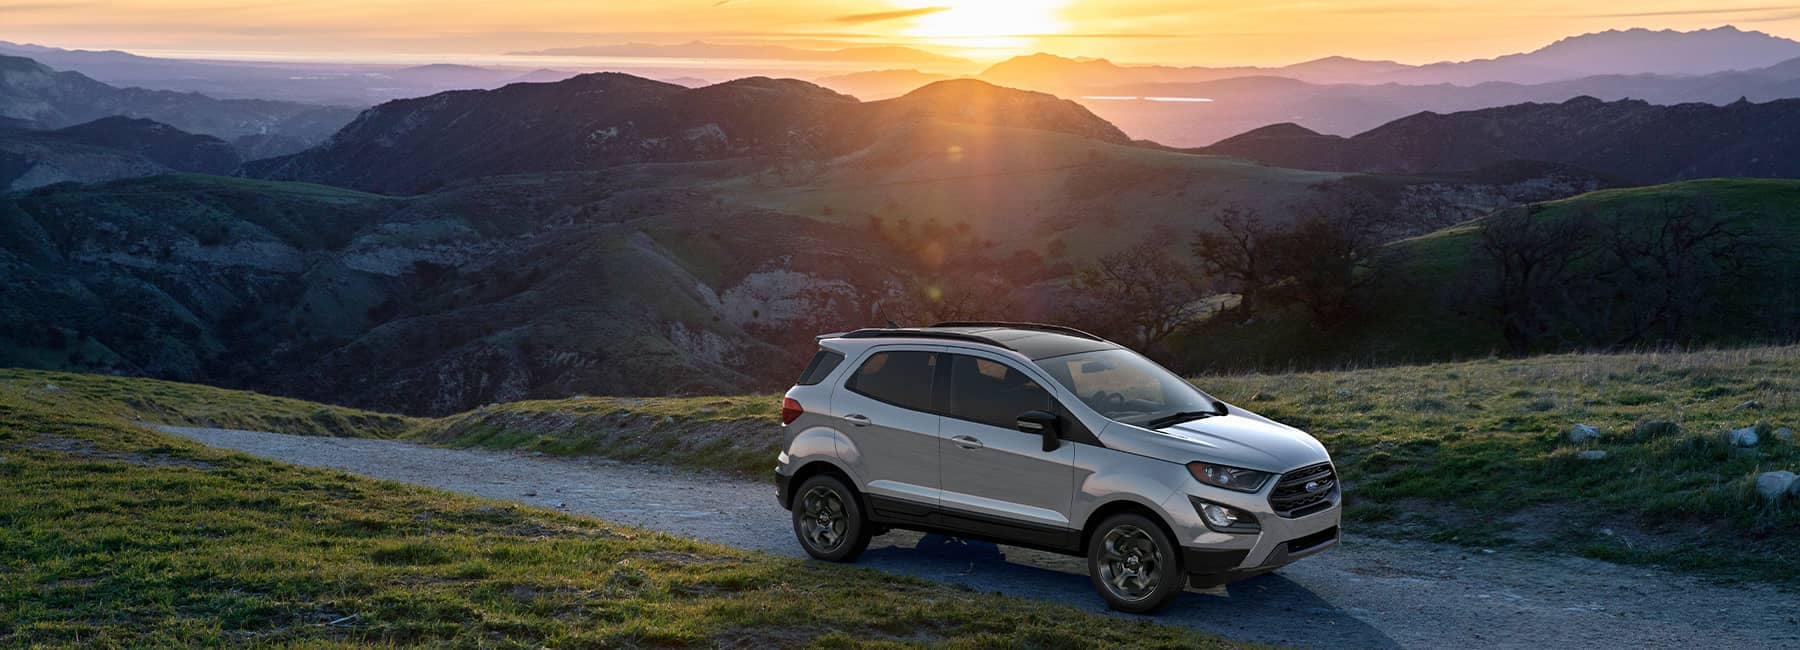 Silver 2021 Ford EcoSport overlooking the sunset behind a mountain range